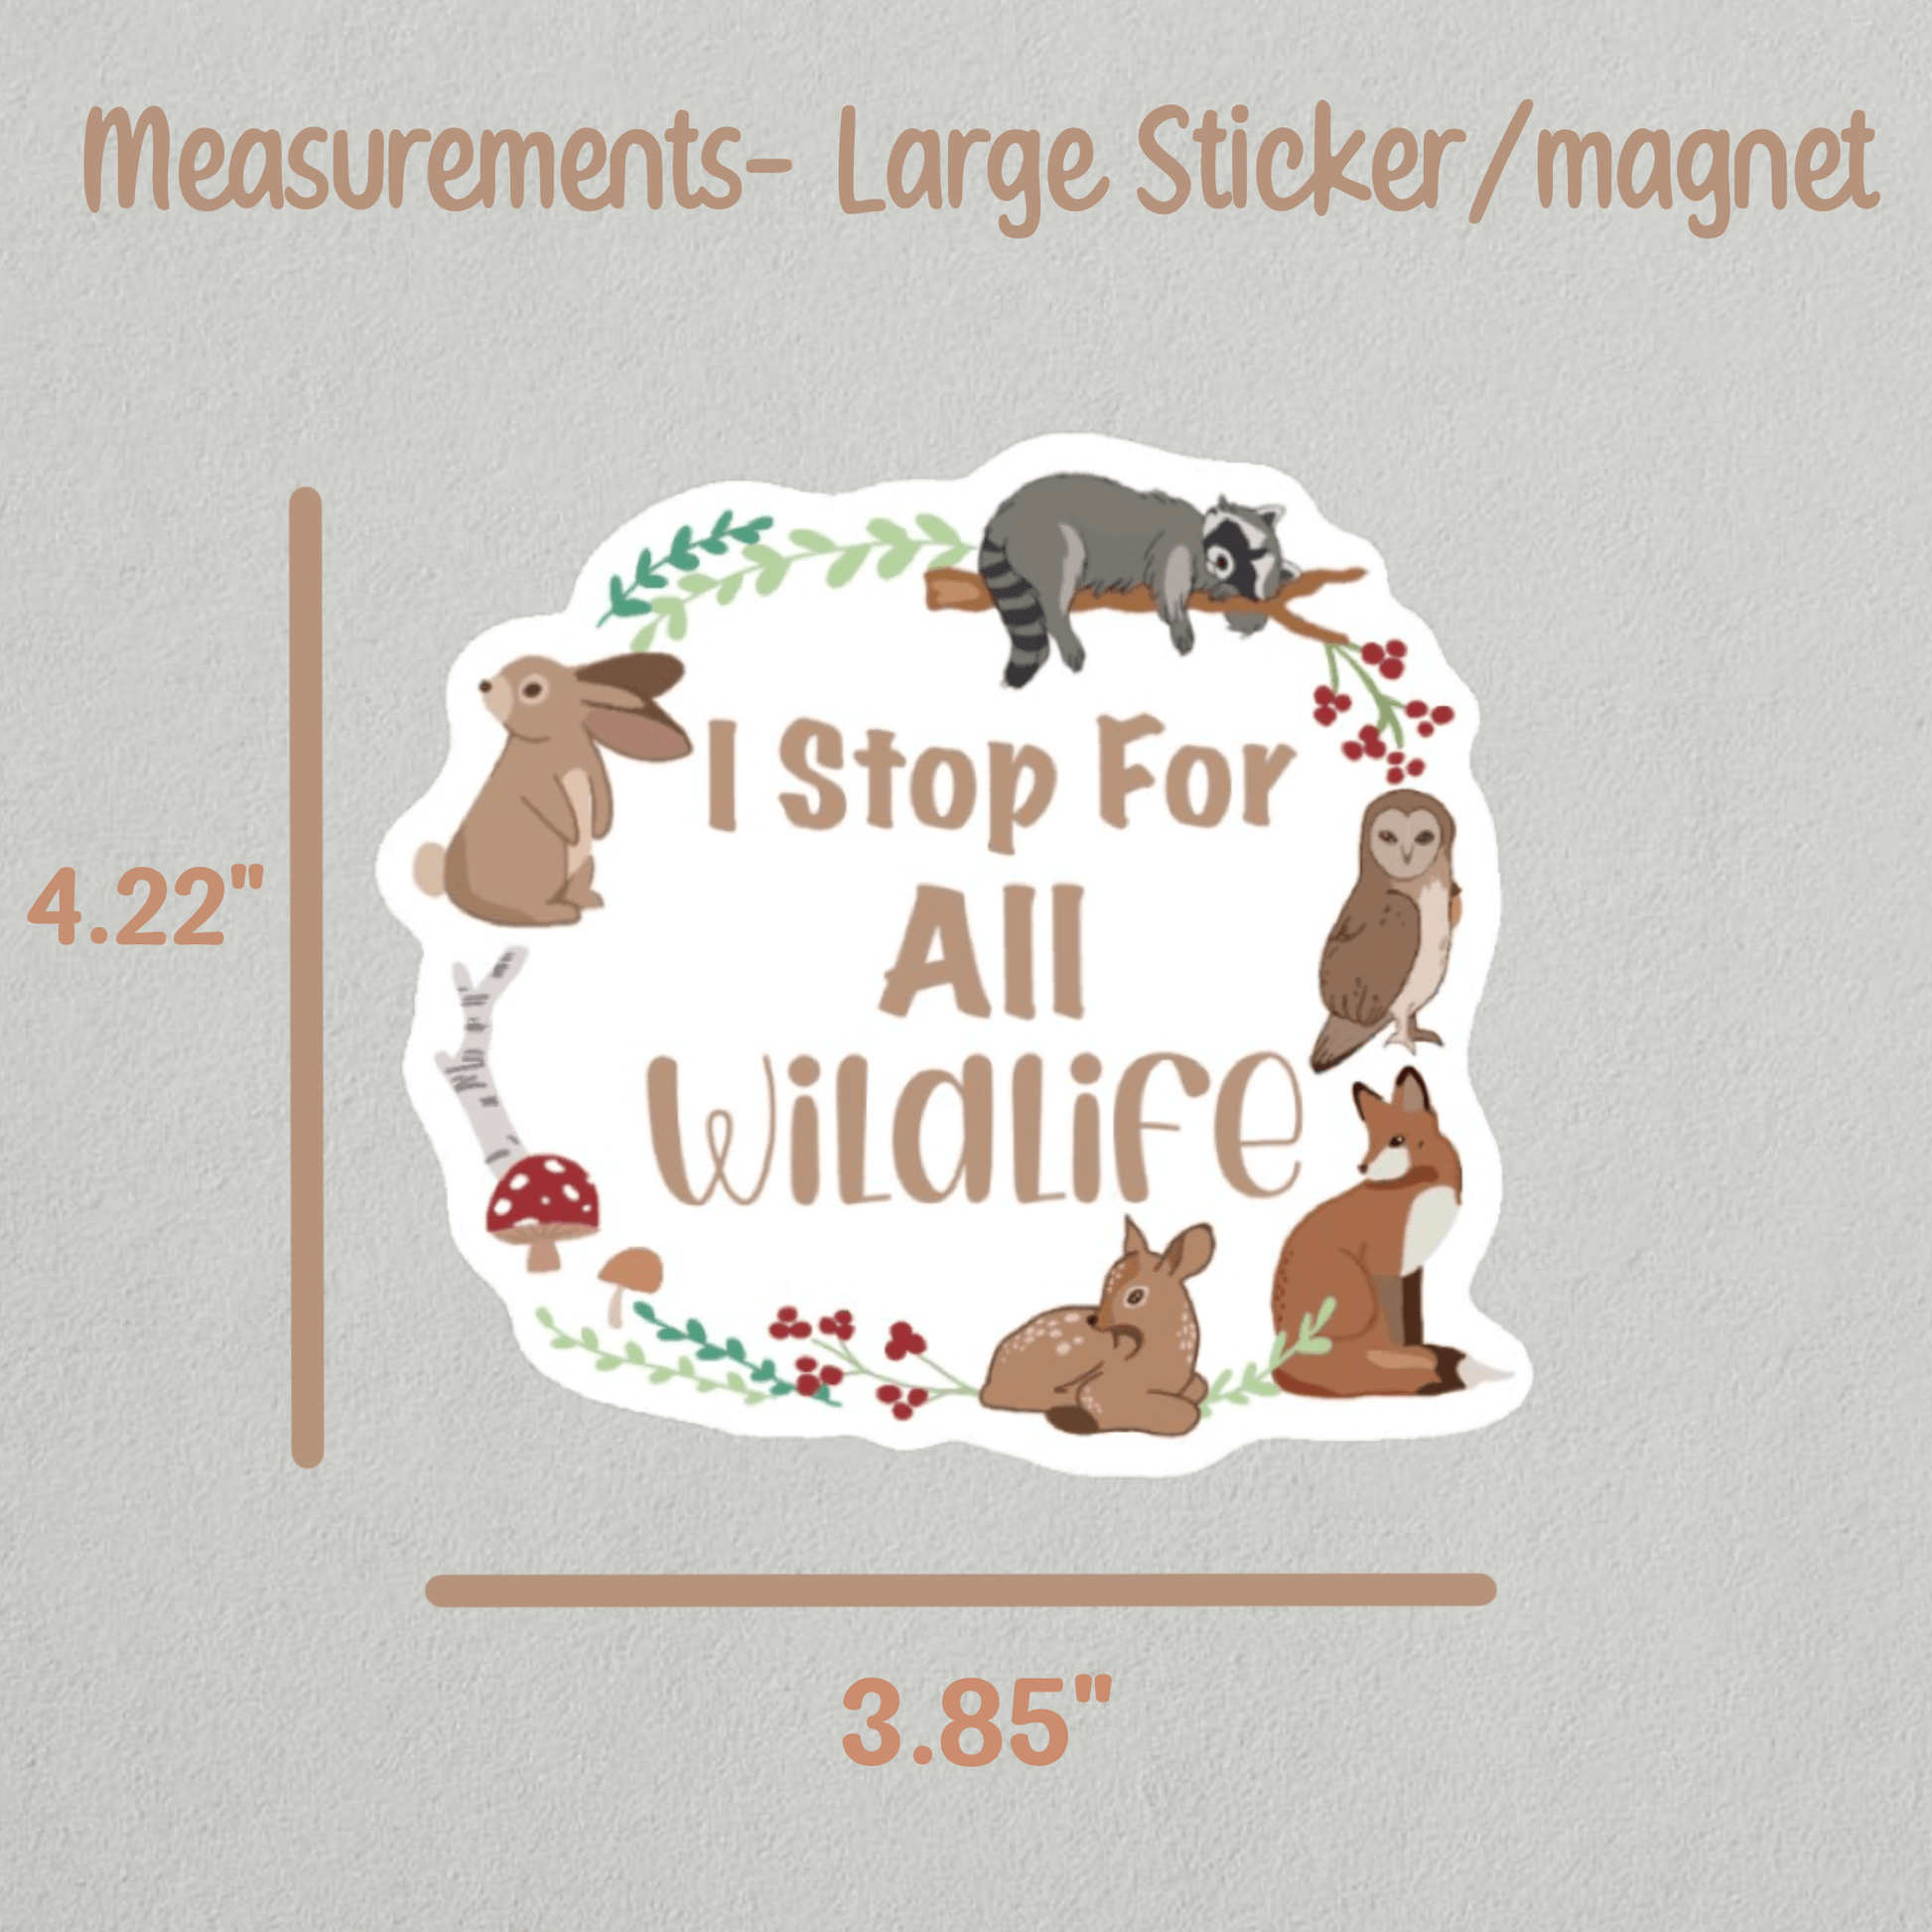 I Stop For All Wildlife Car Decal Sticker Magnet Sticker